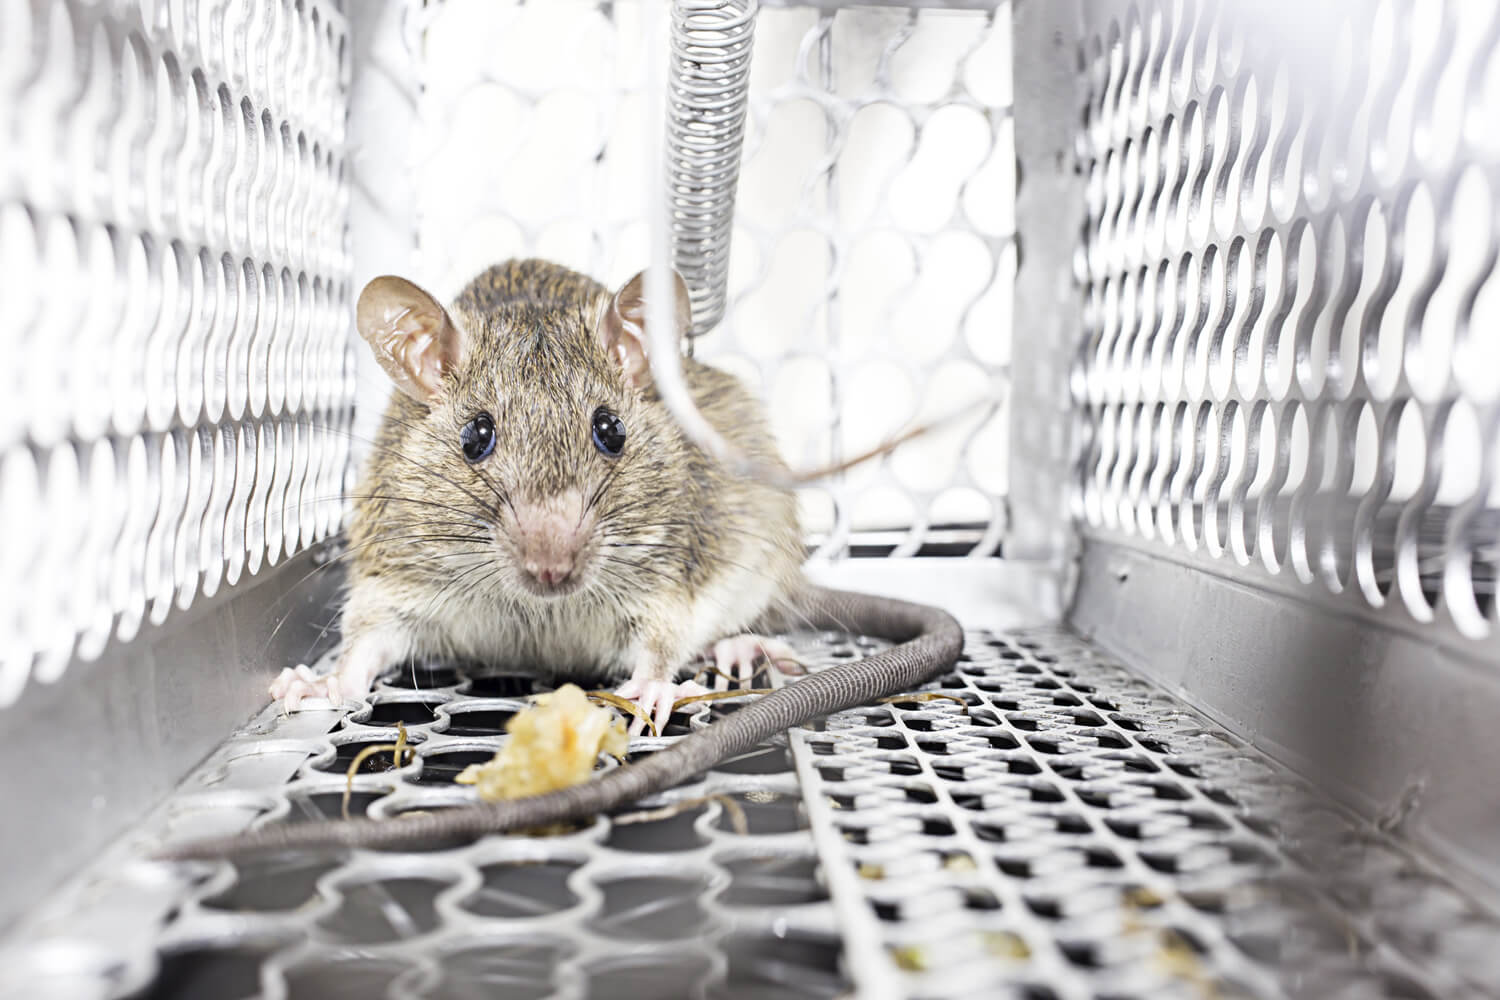 Mouse control services and other pest control services